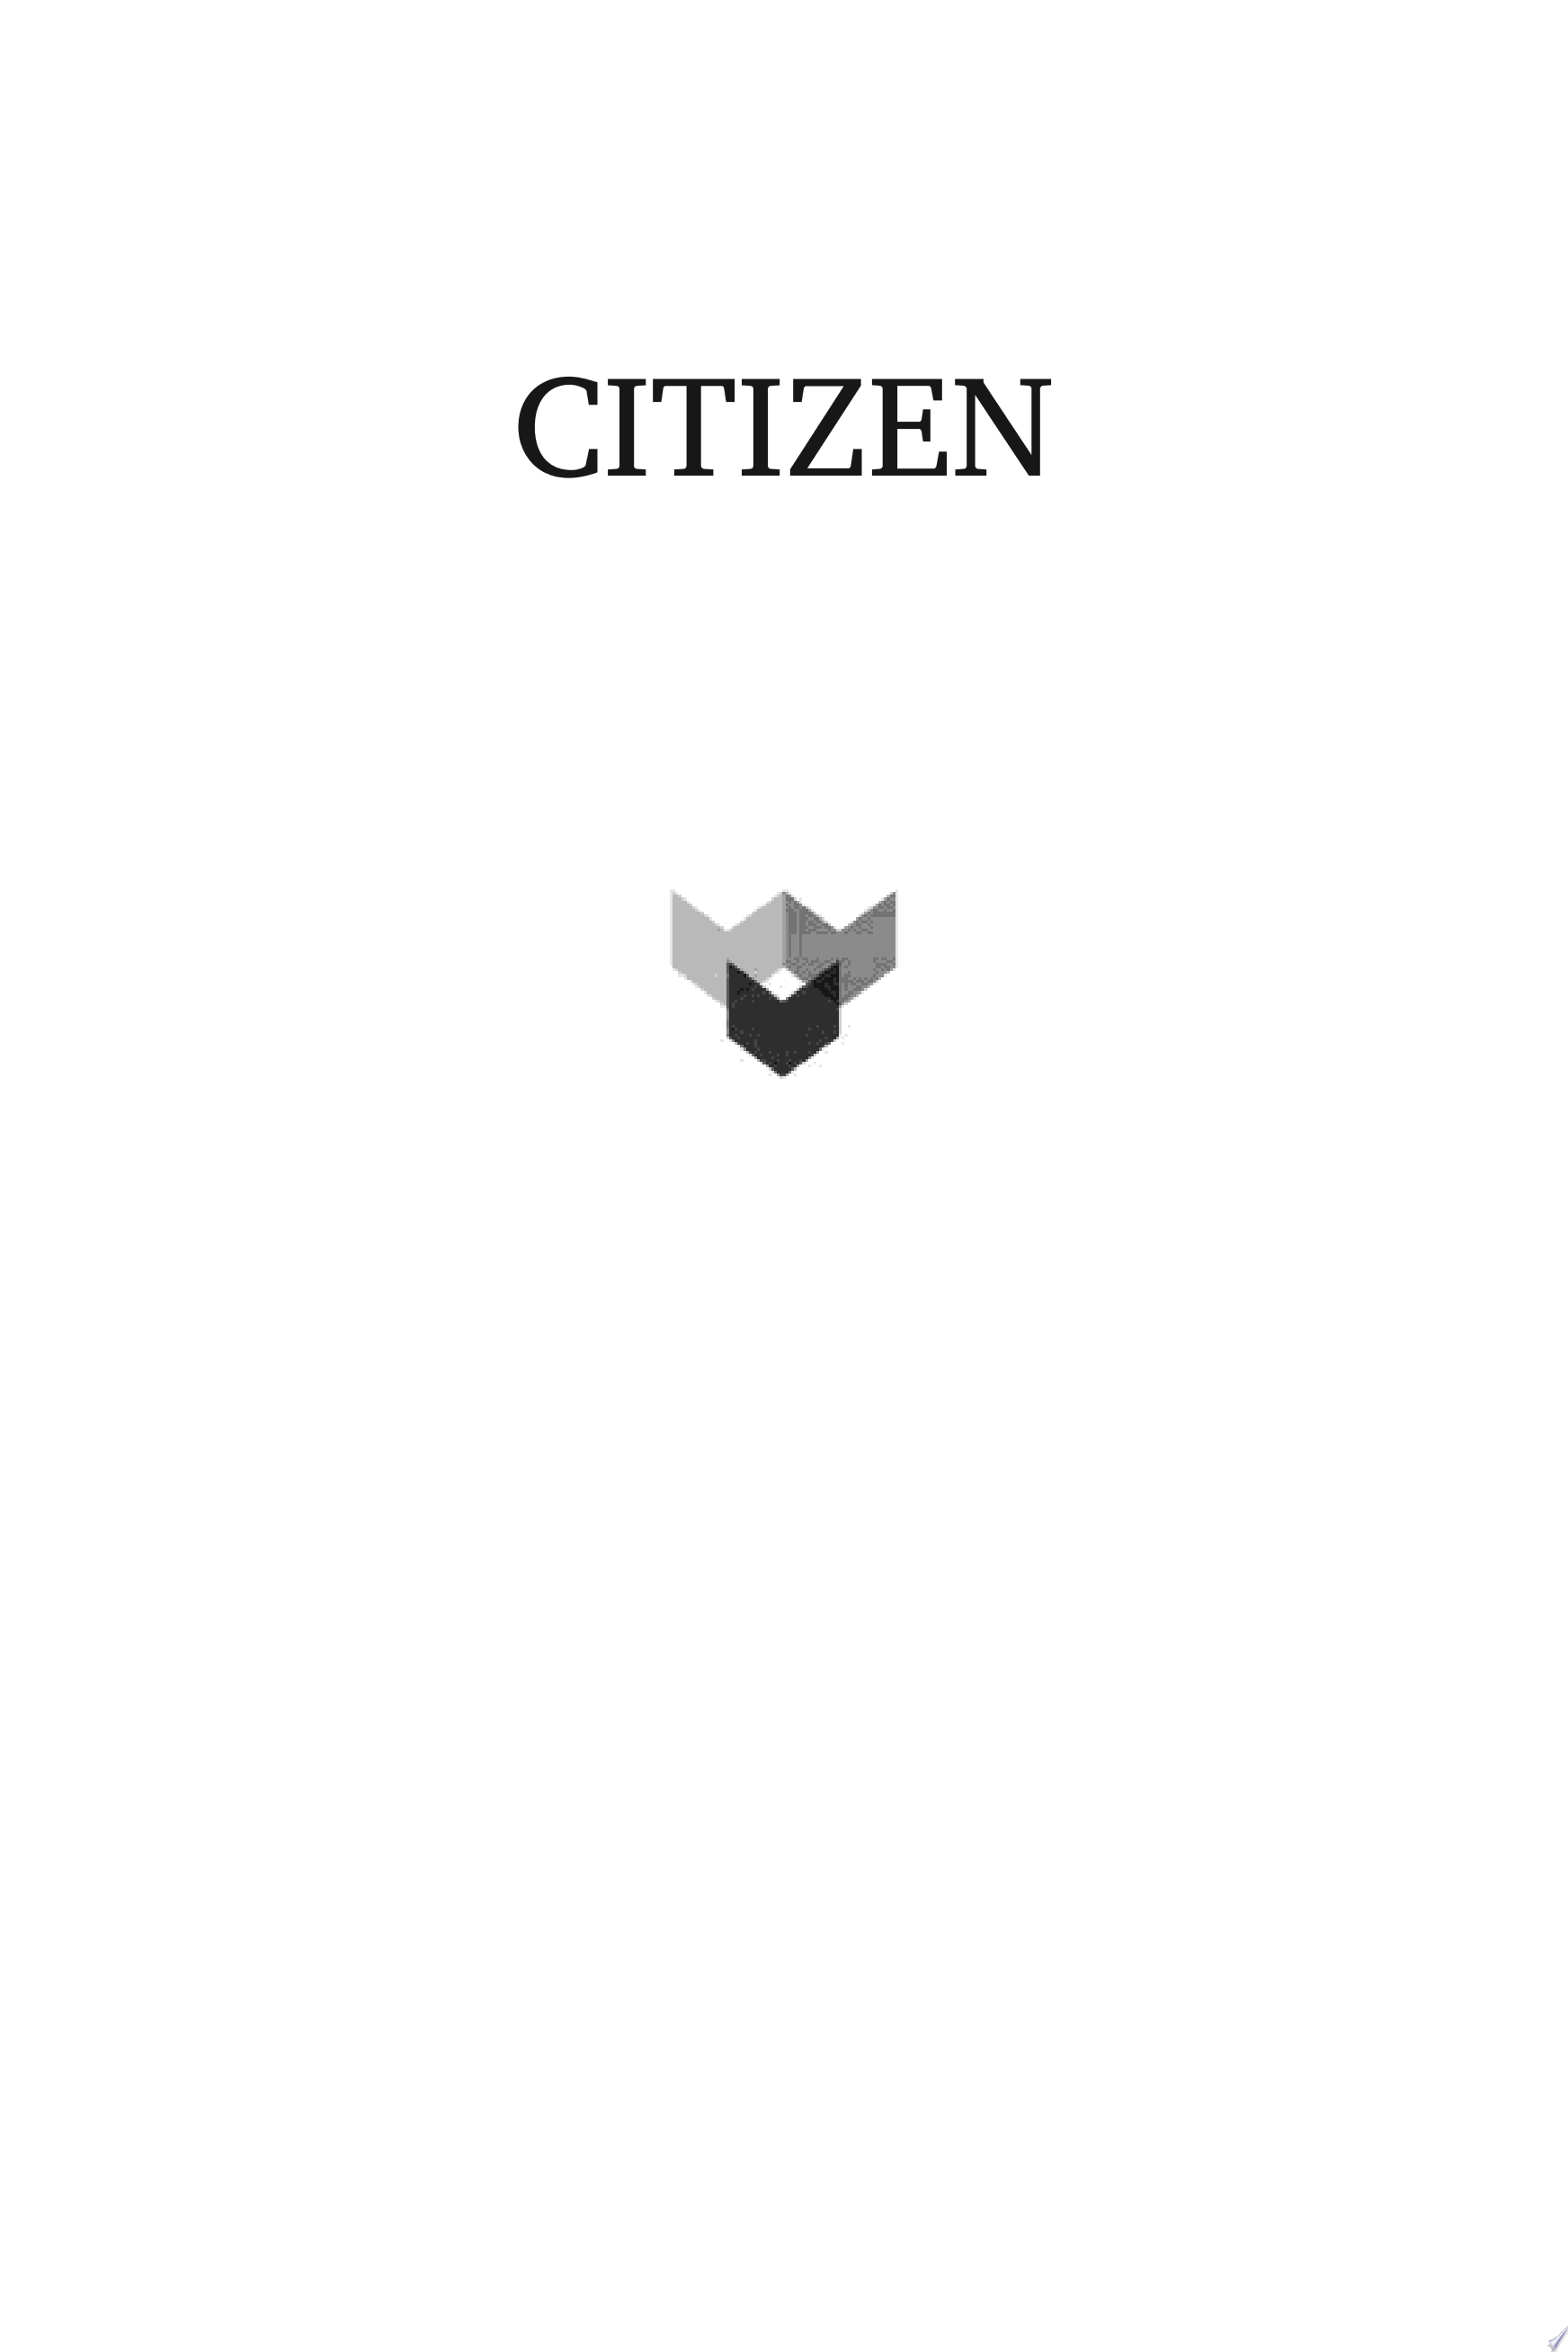 Image for "Citizen"